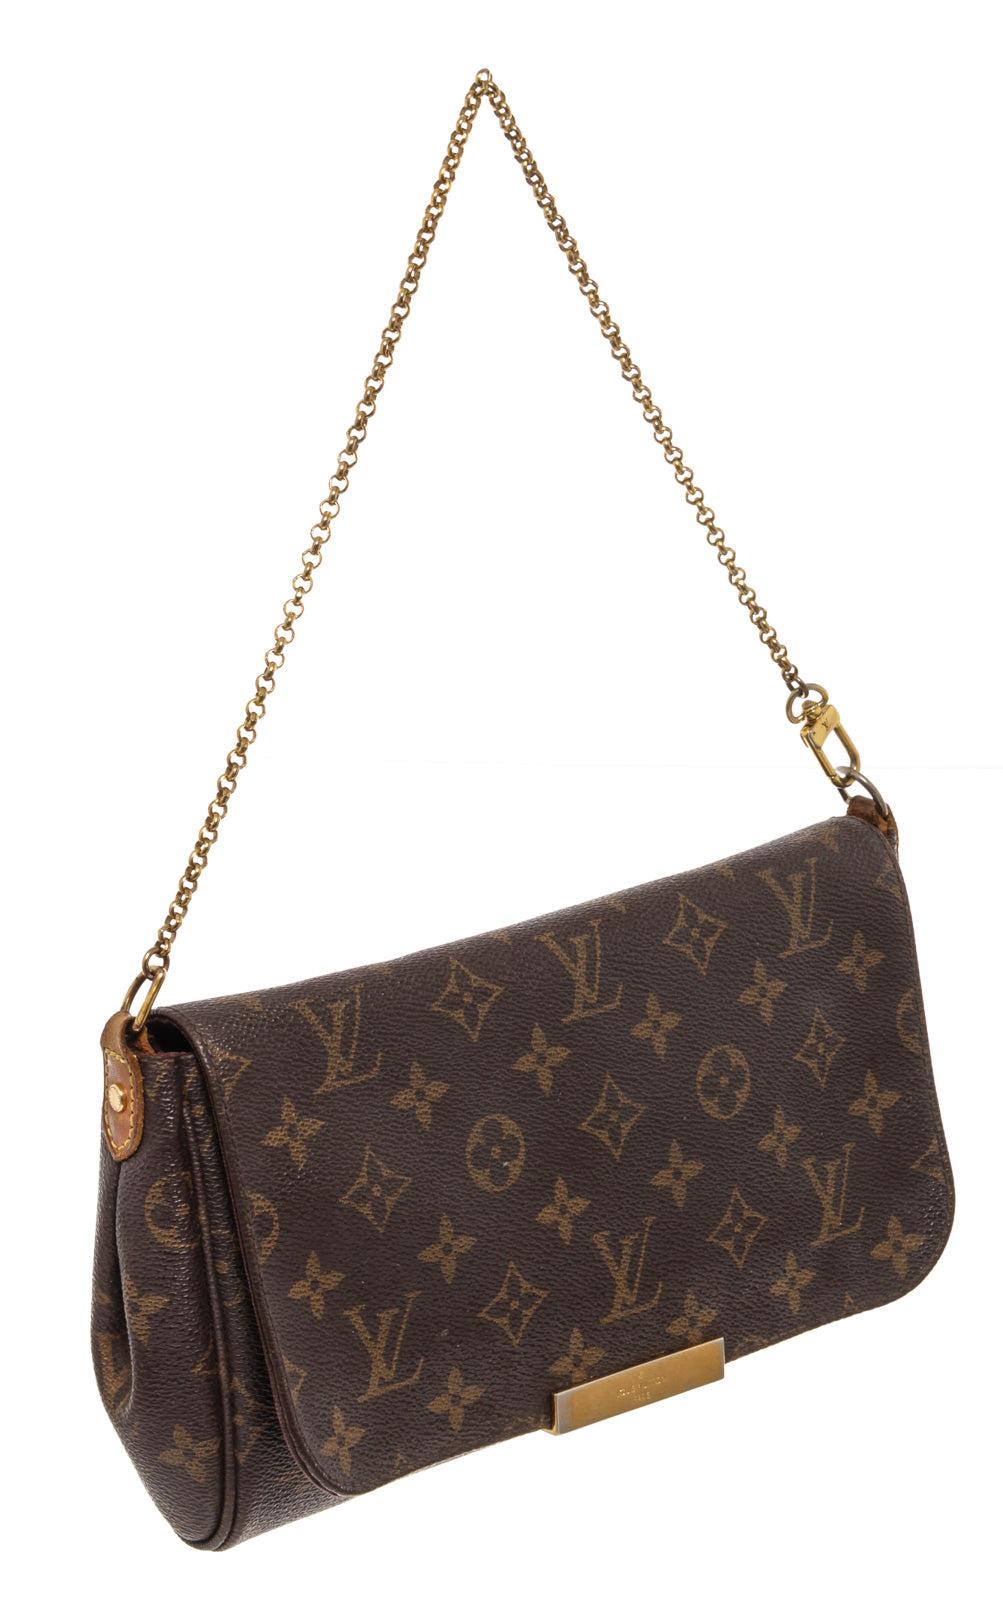 Brown and tan monogram coated canvas Louis Vuitton Favorite MM with gold-tone hardware, detachable flat leather shoulder strap, single top handle with chain-link accent, single flat shoulder strap, burgundy canvas lining, single slit pocket at